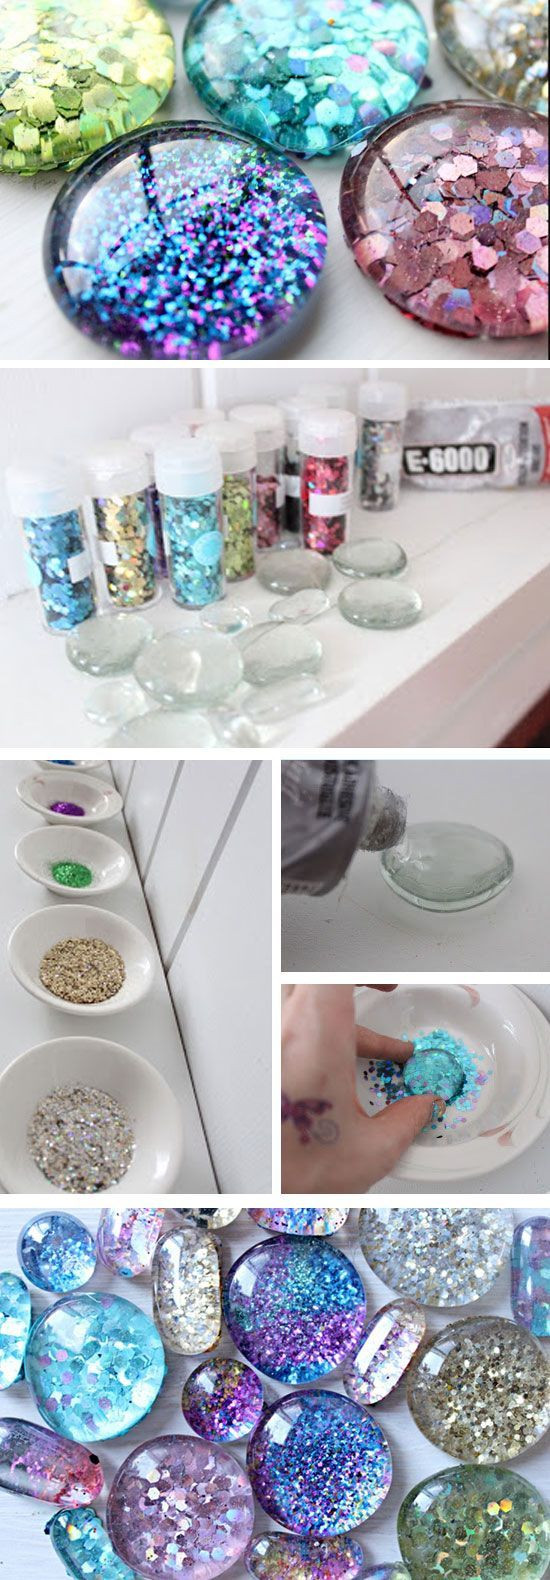 DIY Christmas Gifts For Teenagers
 Best 25 Teen crafts ideas on Pinterest